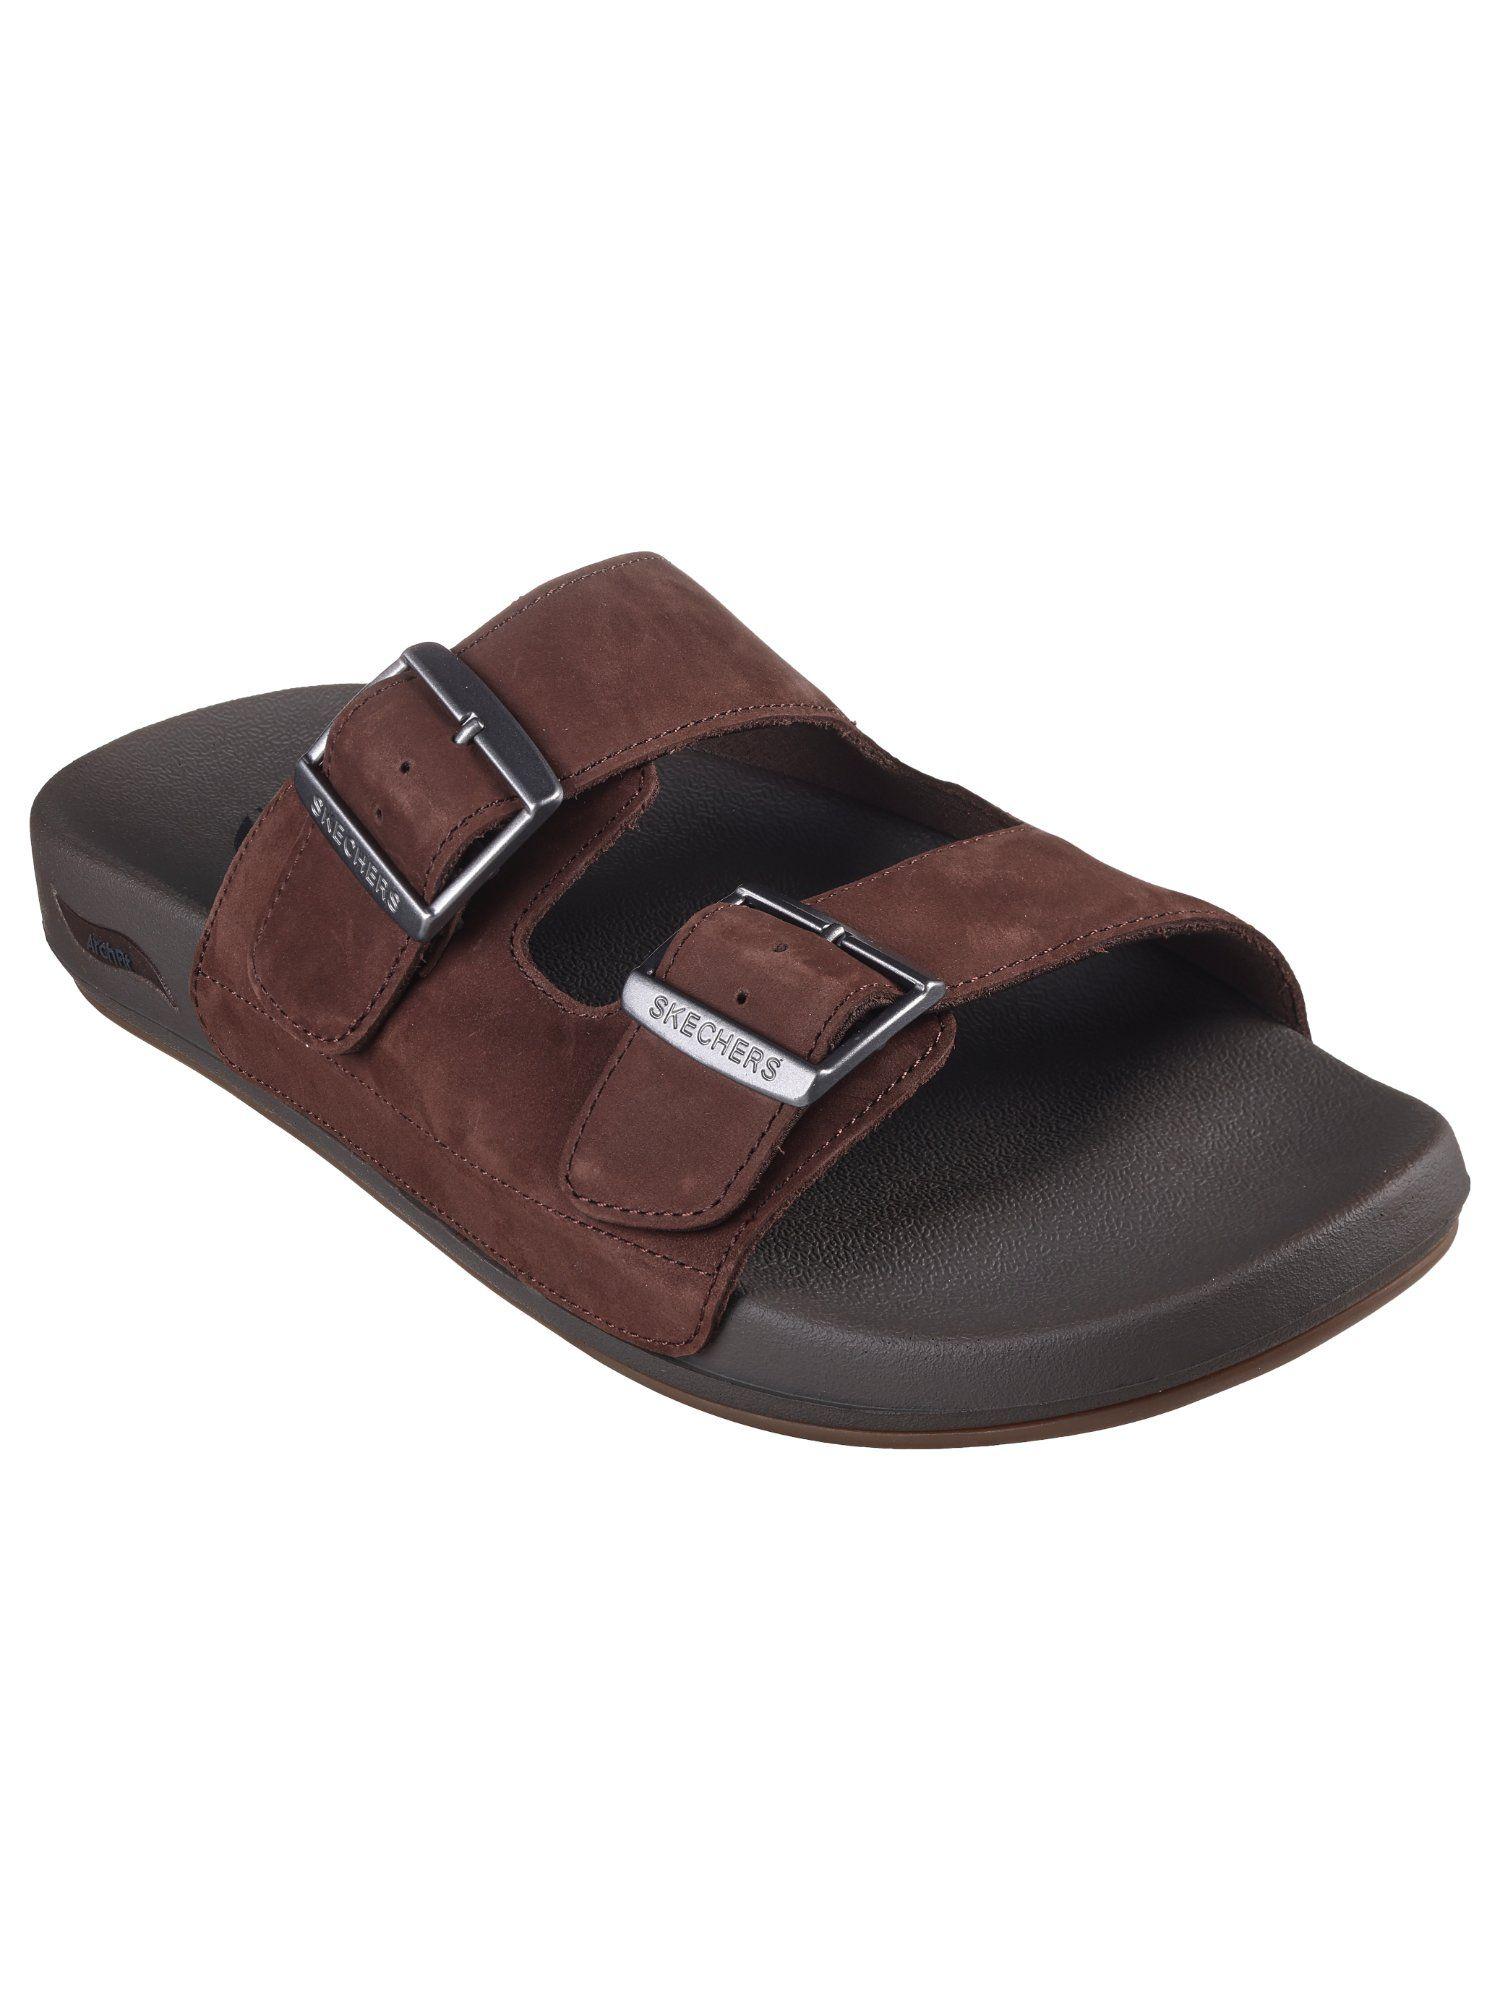 arch fit pro sandal brown sliders